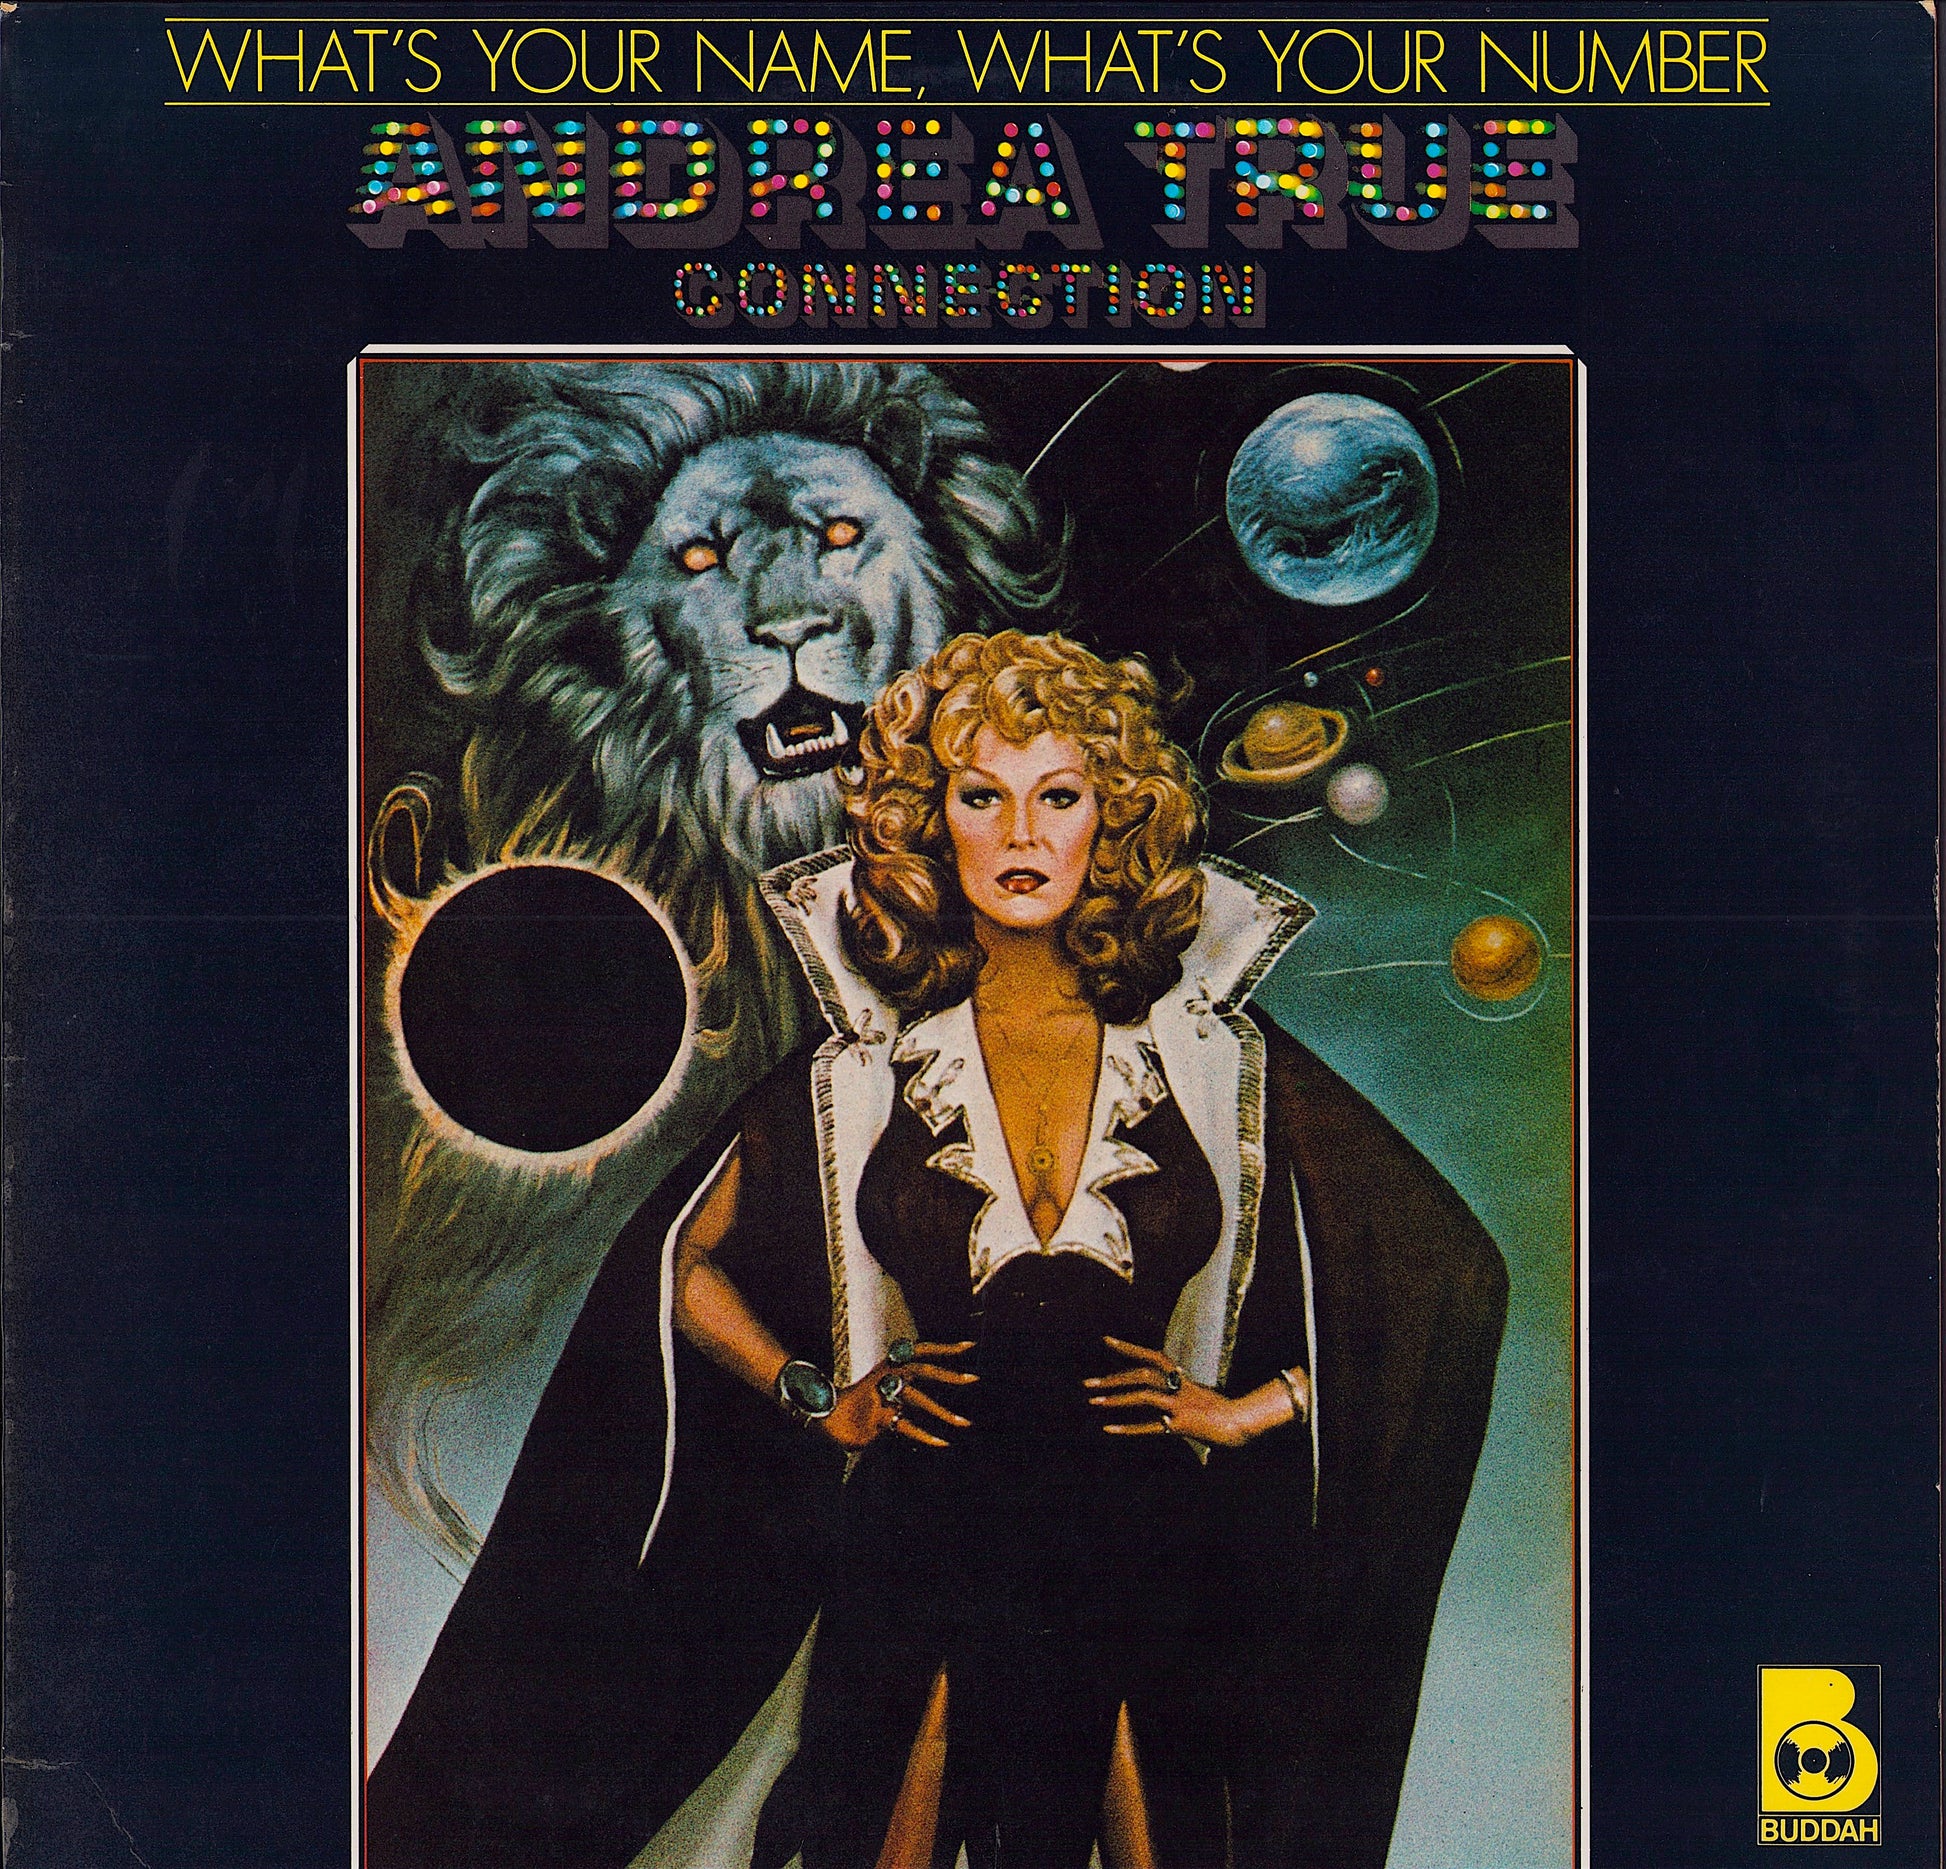 Andrea True Connection - What's Your Name, What's Your Number (Vinyl LP)